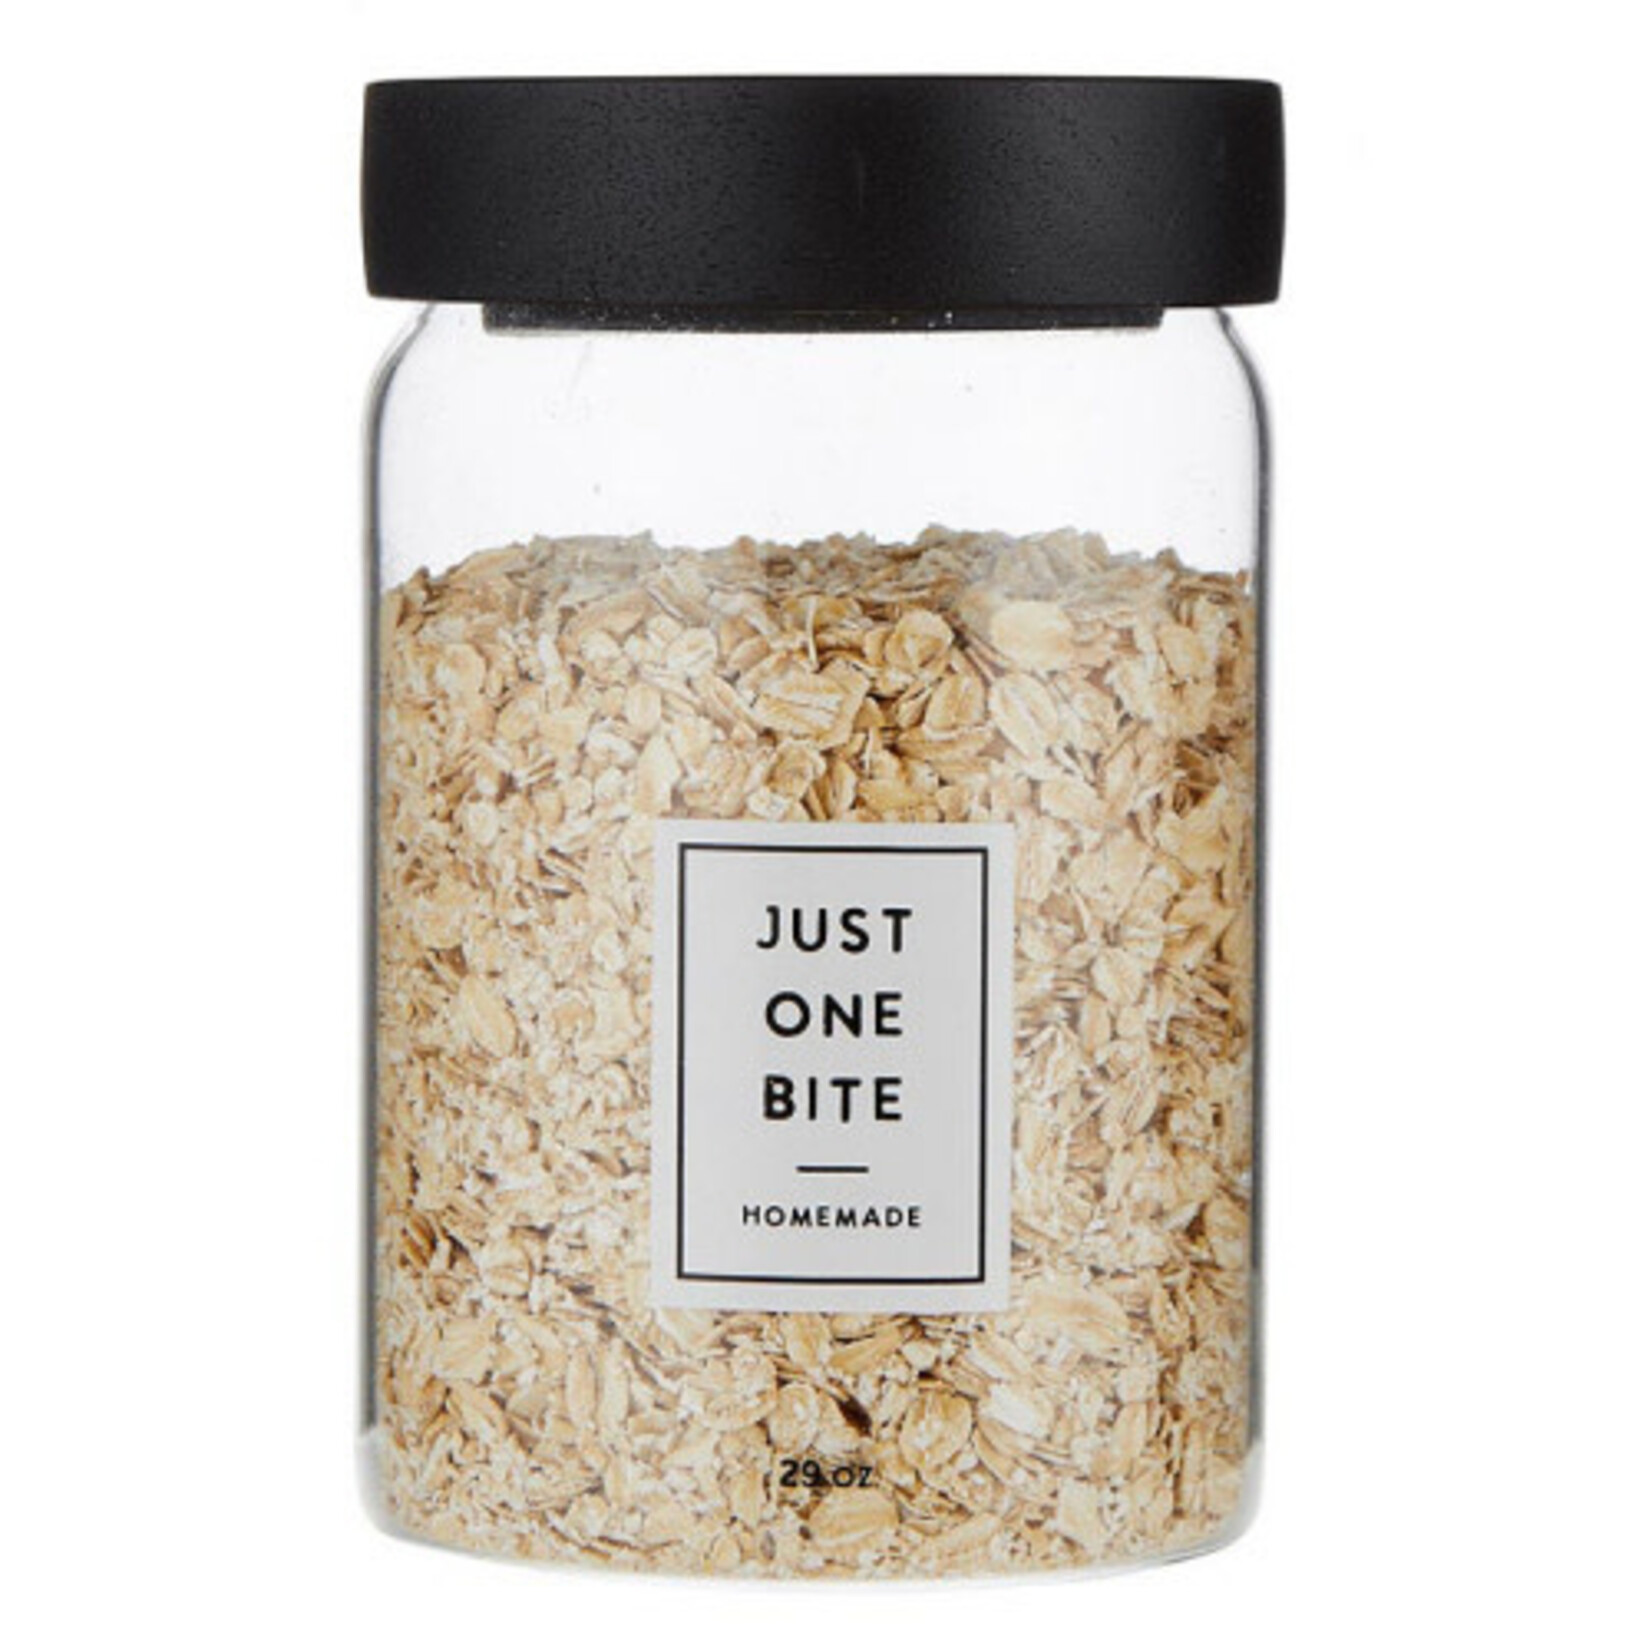 Creative Brands One Bite Pantry Canister - 29oz.